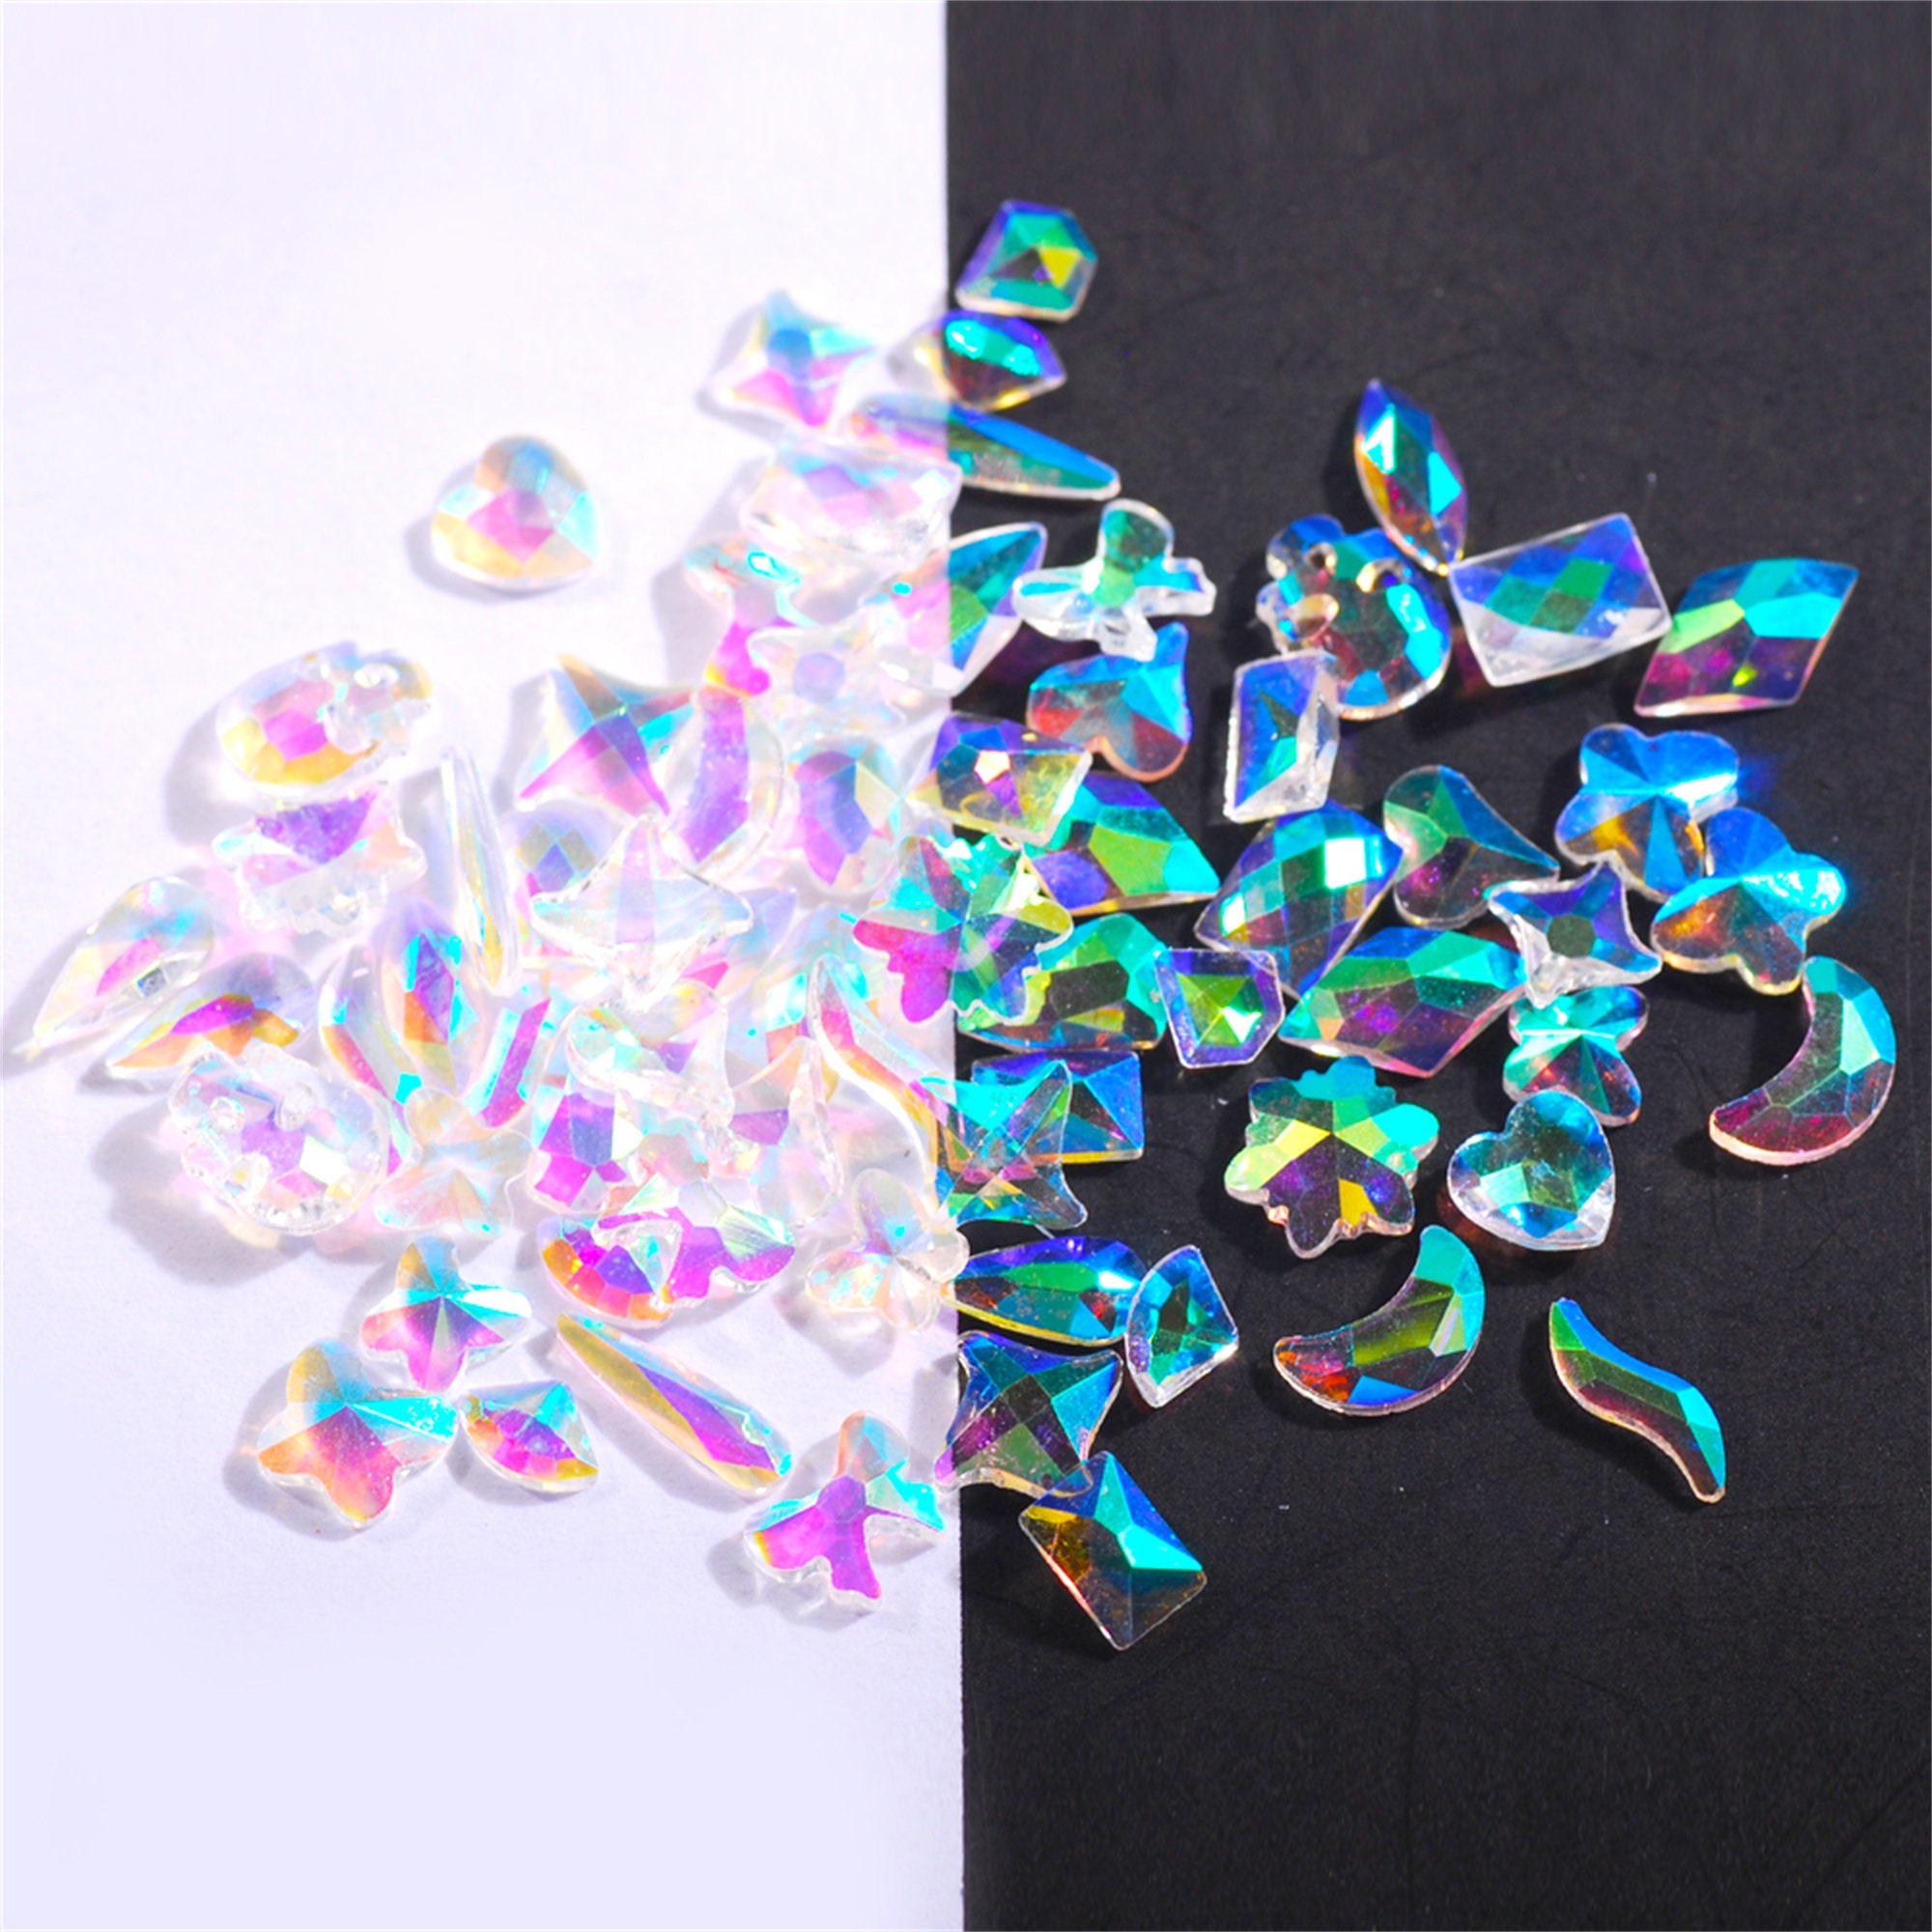 Glitter Bright Shield Shape Colorful Craft Gems Crystal K9 Glass  Rhinestones Applique accessories Fancy Stones for